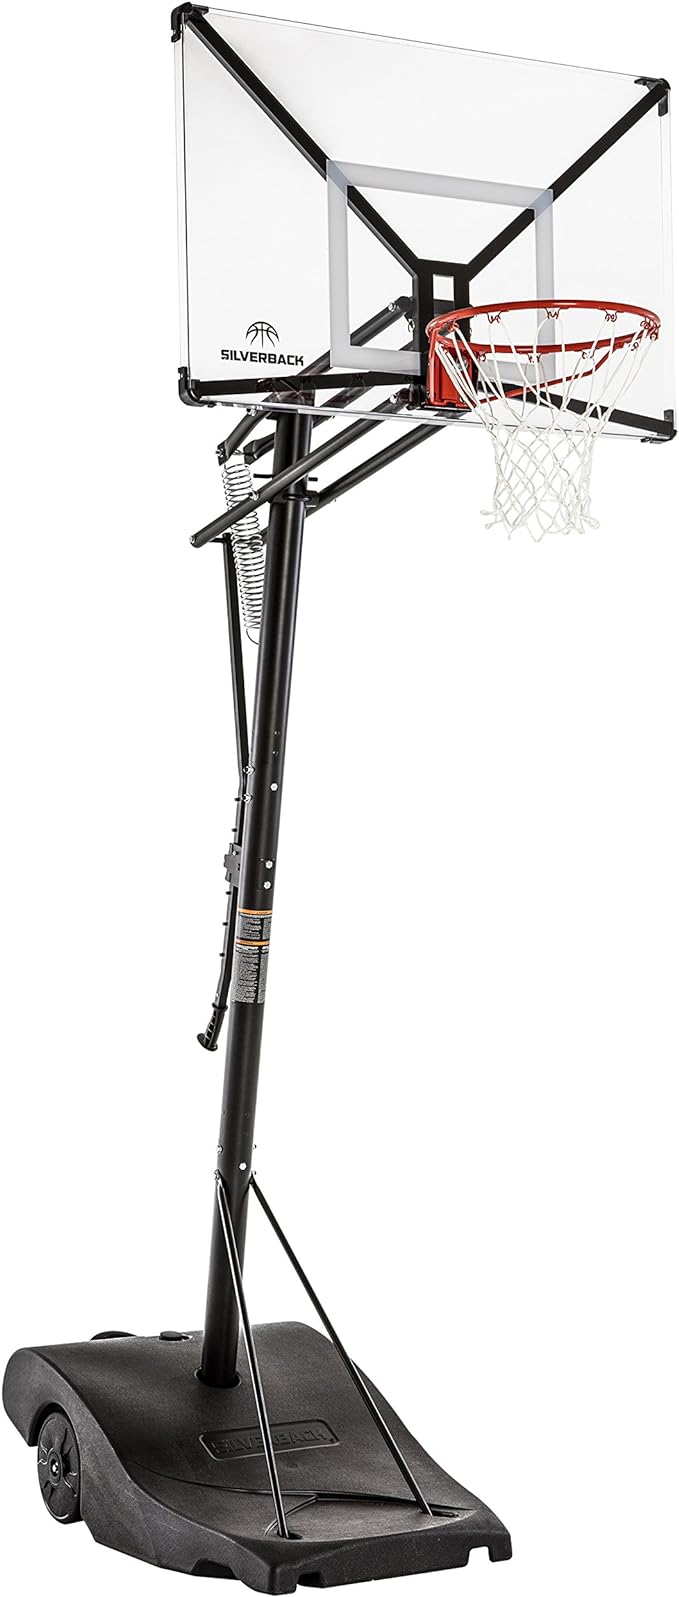 silverback nxt portable adjustable 10ft outdoor basketball hoop 50 and 54 goal backboard available 